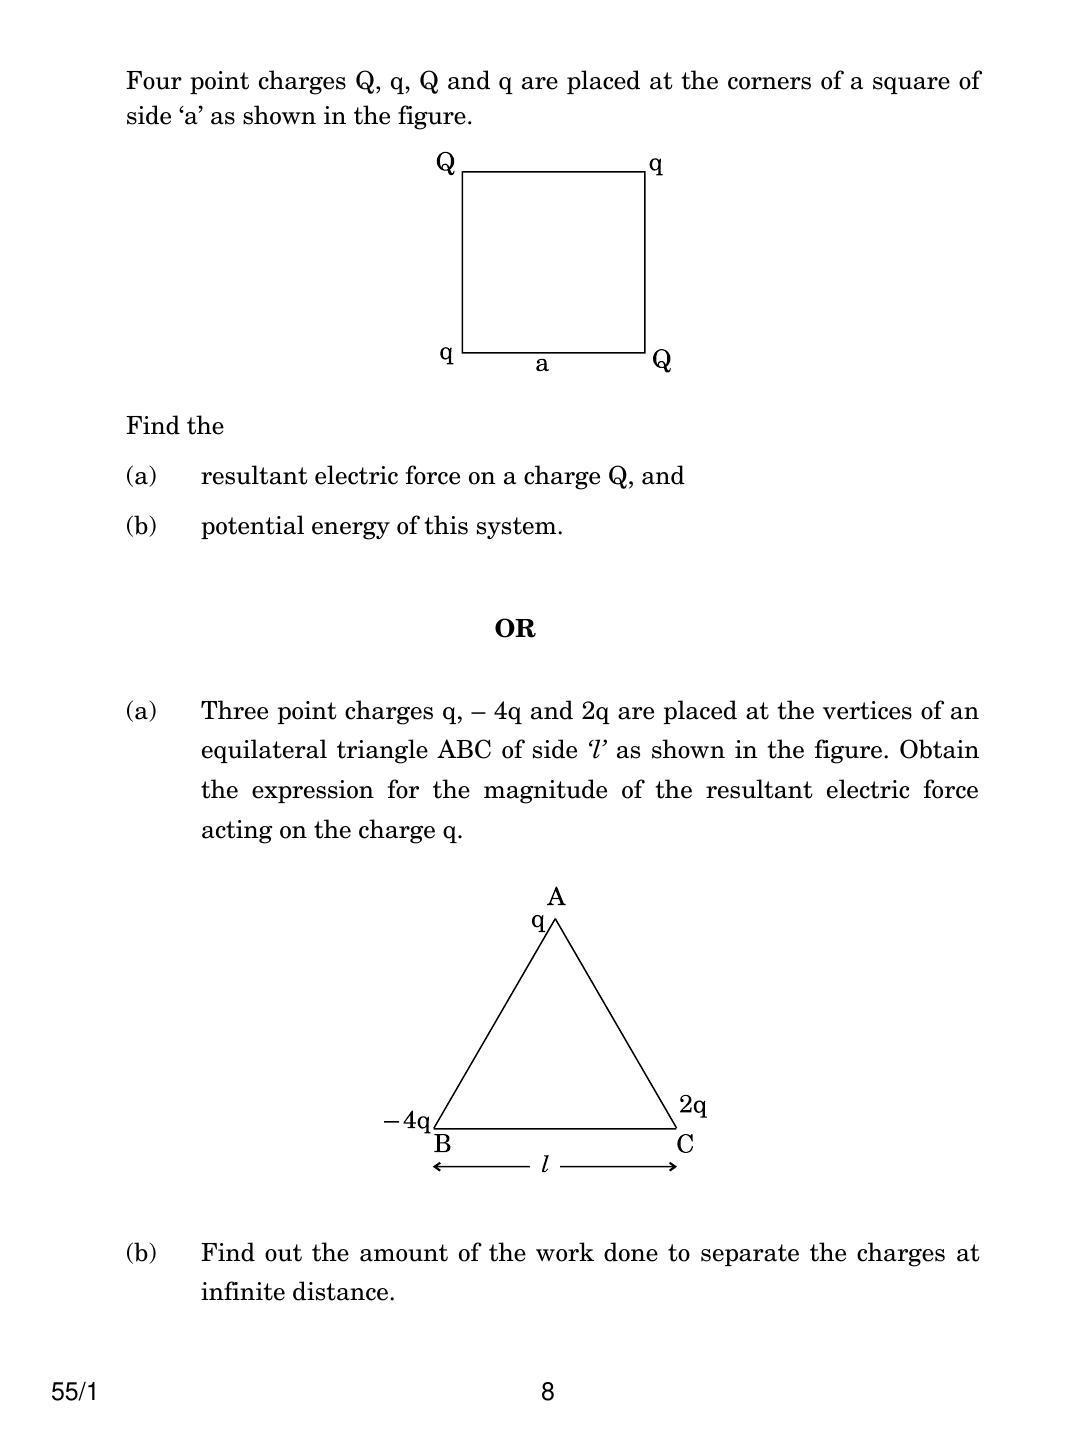 CBSE Class 12 55-1 PHYSICS 2018 Question Paper - Page 8